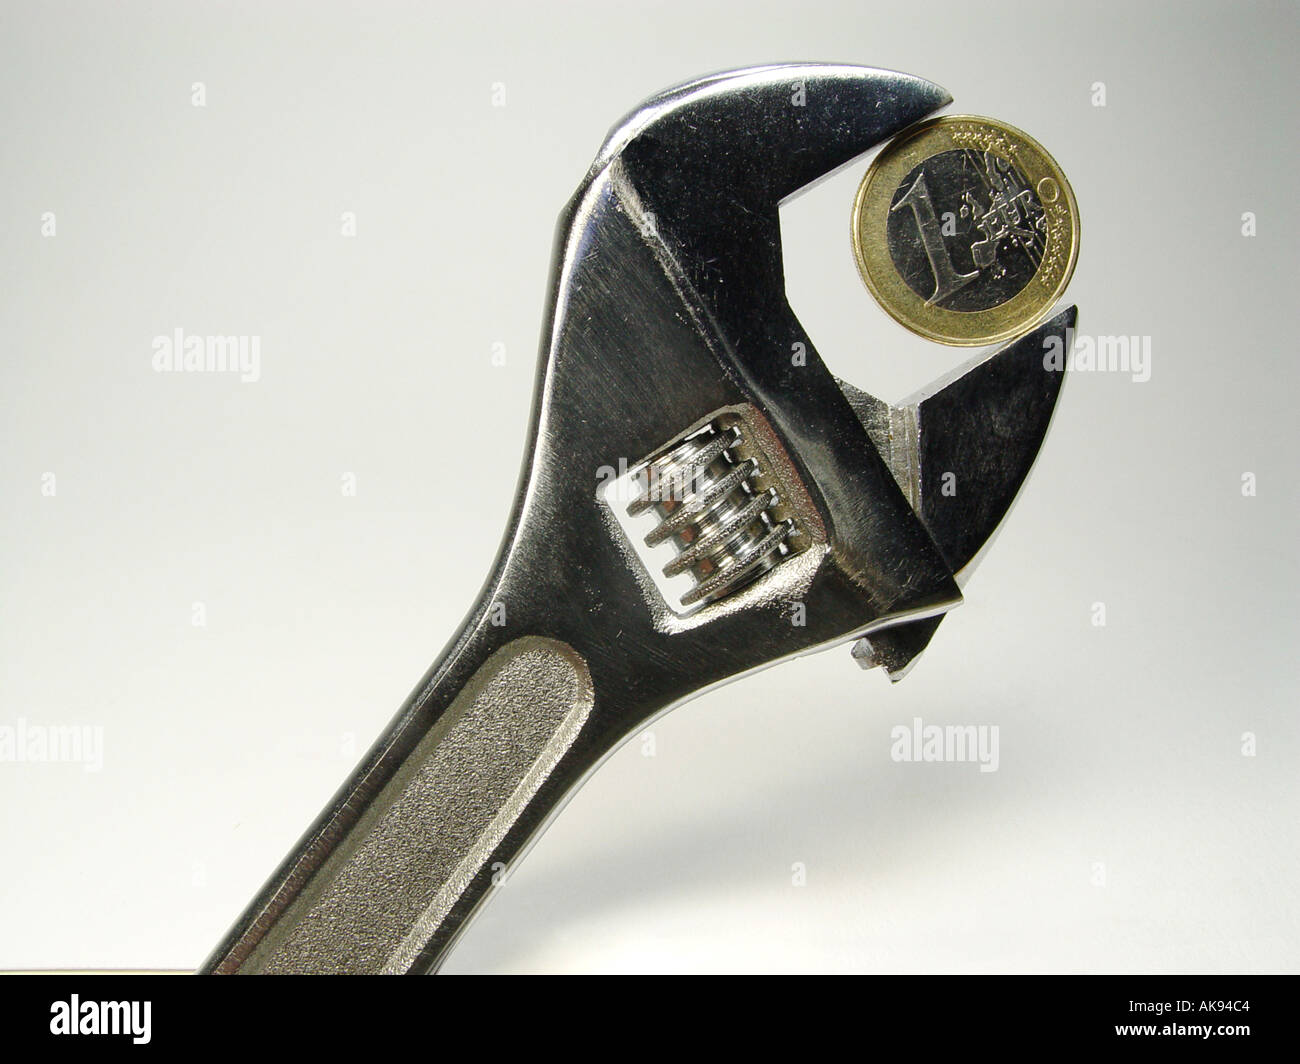 Euro in a wrench as symbol for exchange rate fluctuations in the currency Stock Photo